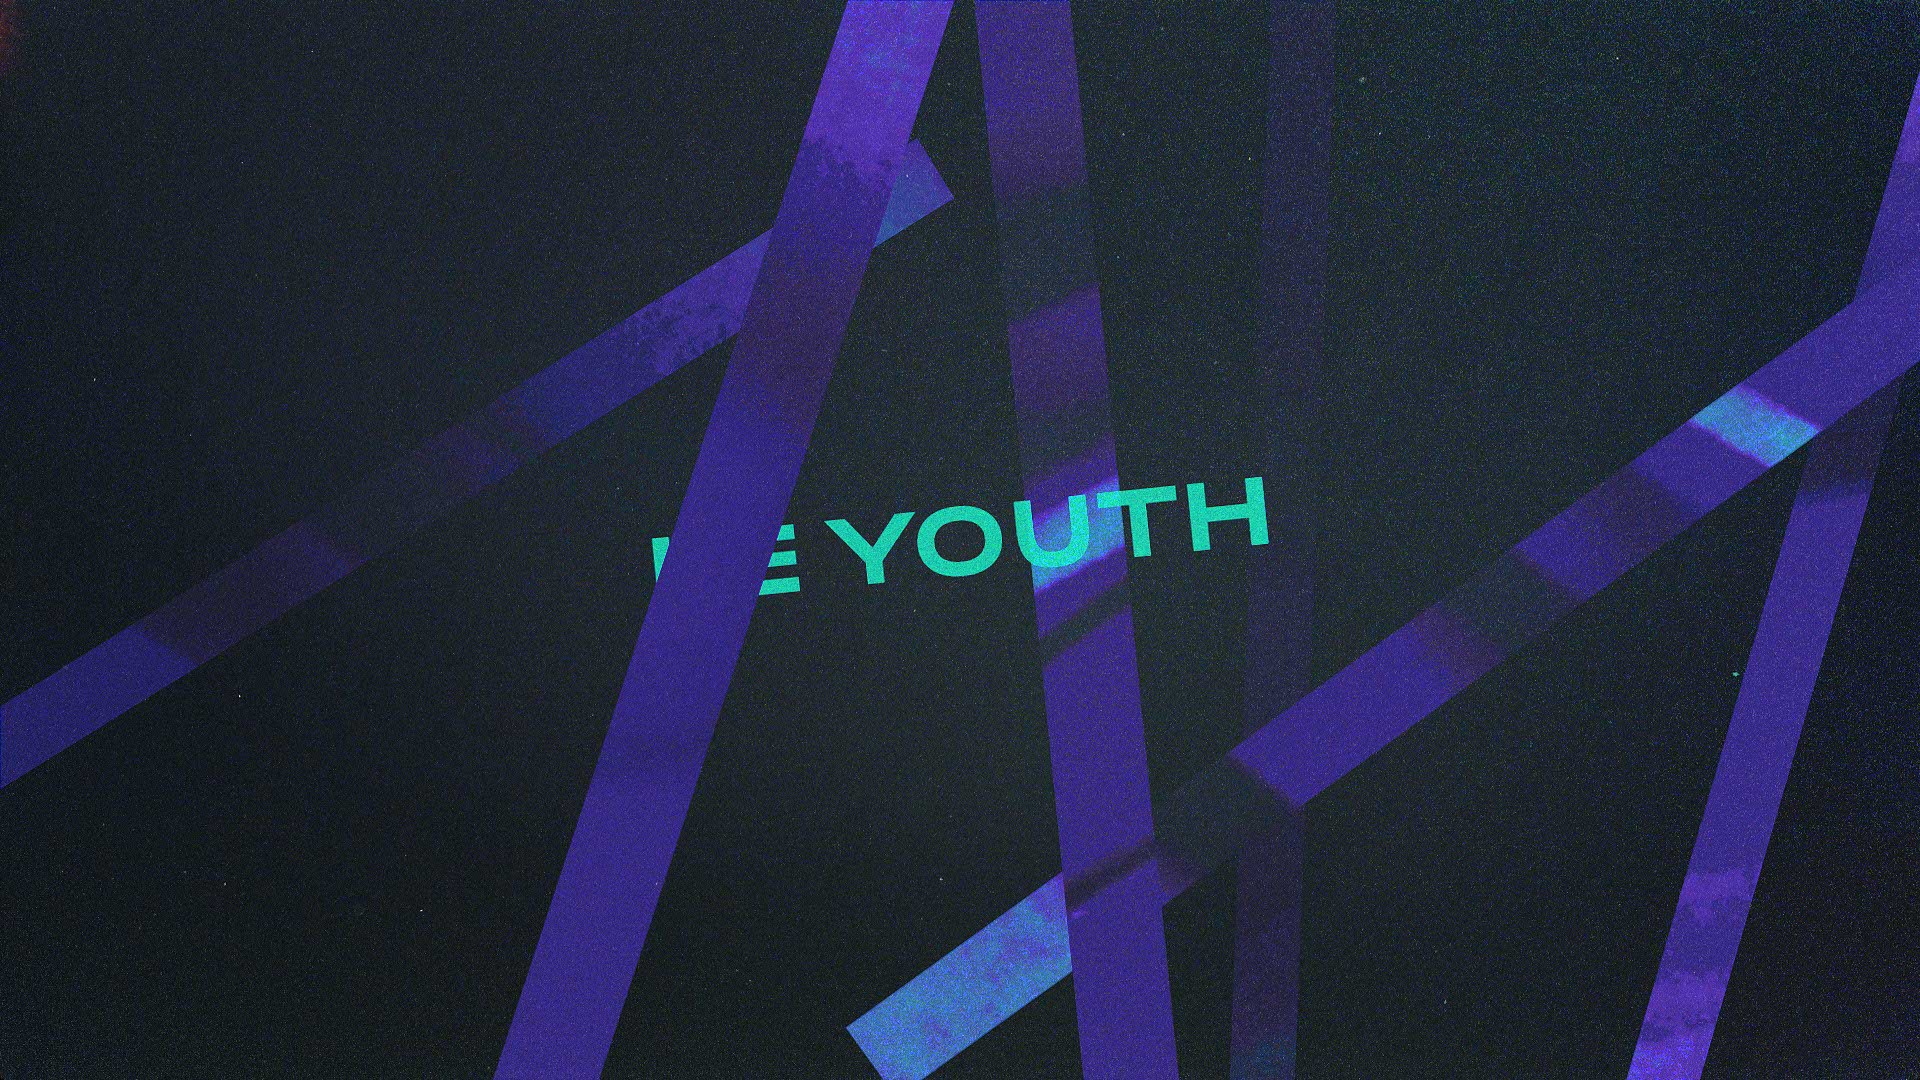 Le-youth-Tour-Visuals-Article_T1-1-Le-Youth-Tour-Visual_2023-07-03_21.15.22